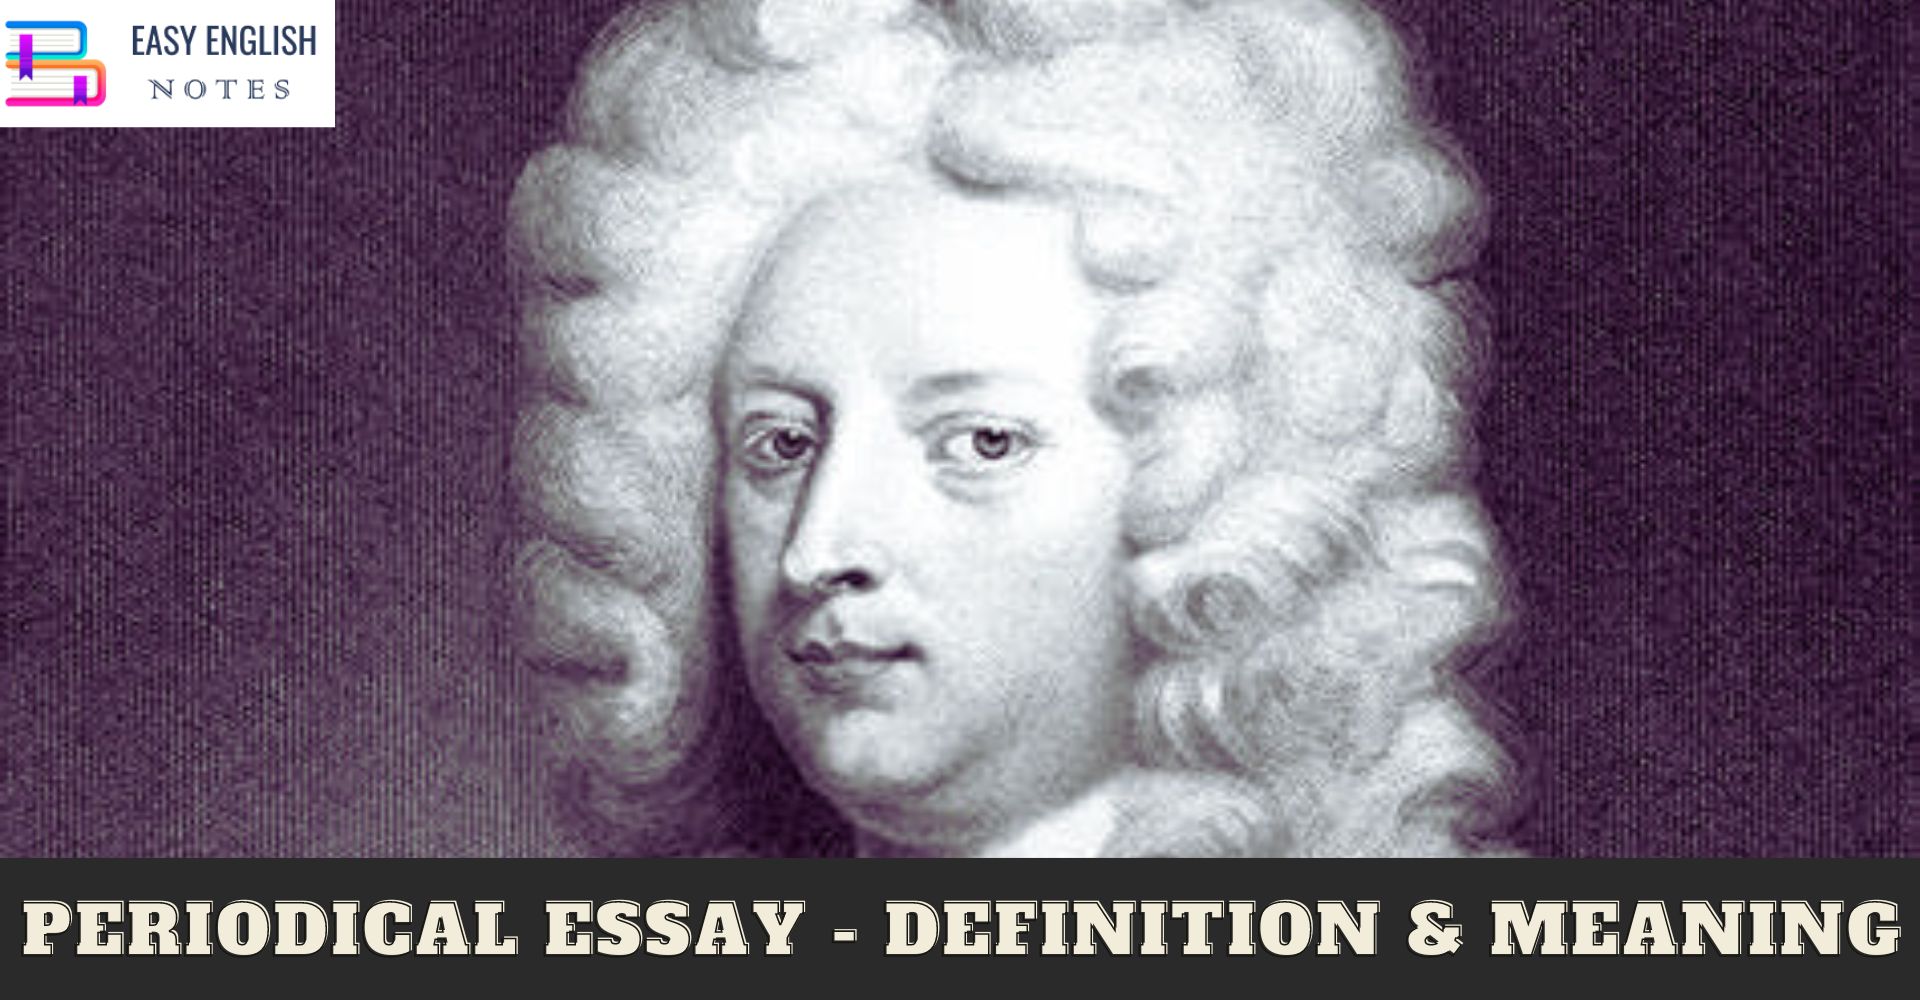 Periodical Essay - Definition & Meaning